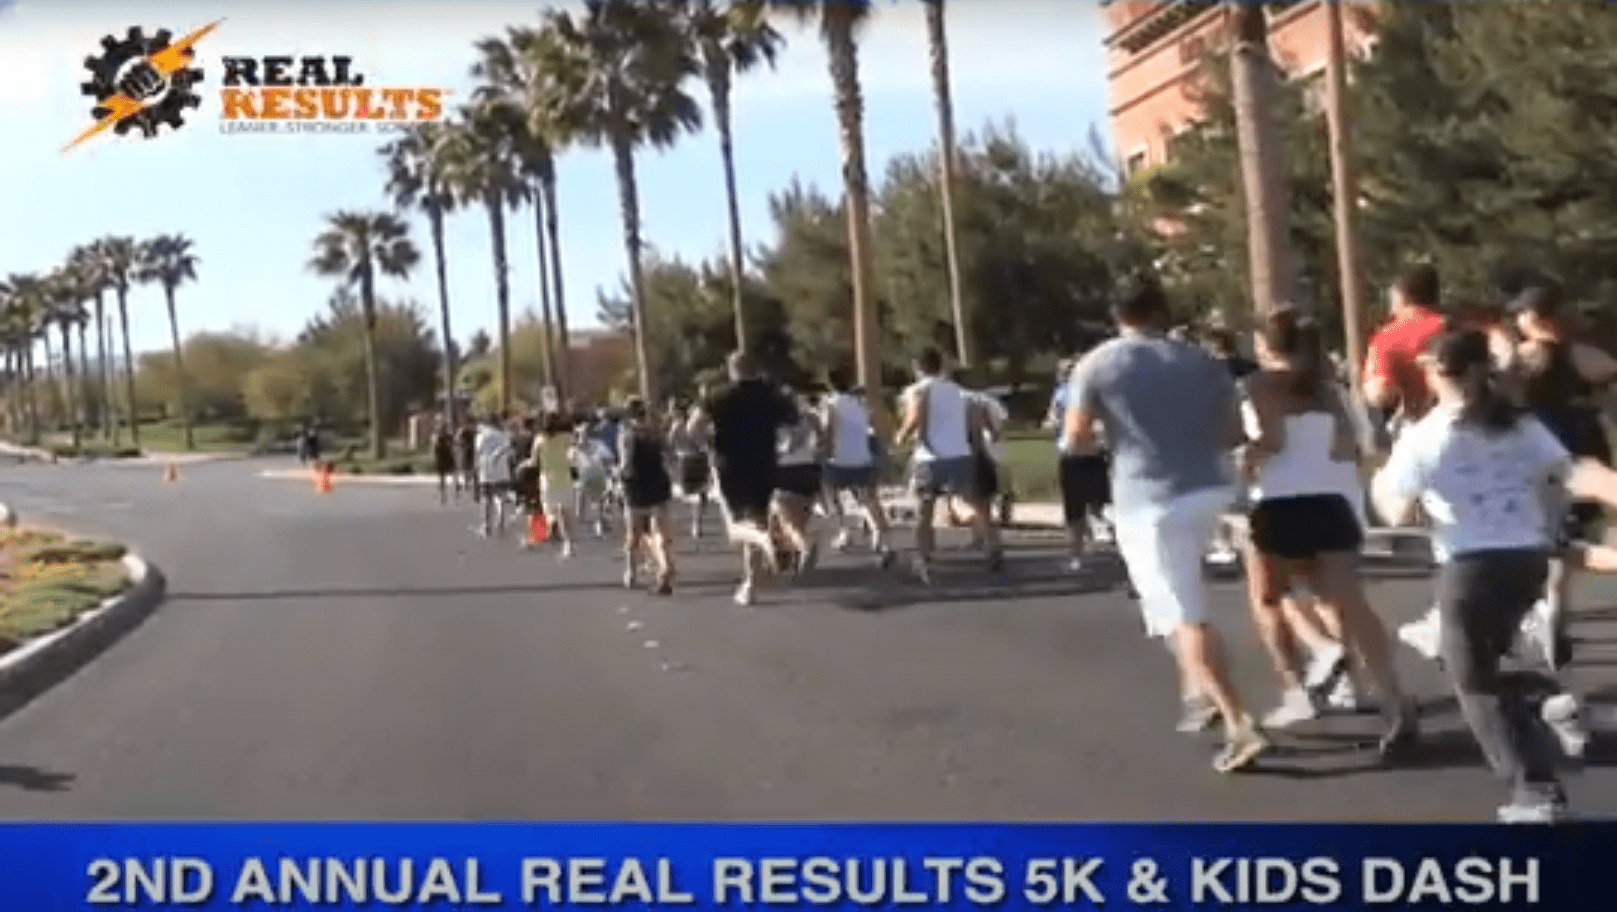 FOX 5 feature on REAL RESULTS 5K & Kids Dash